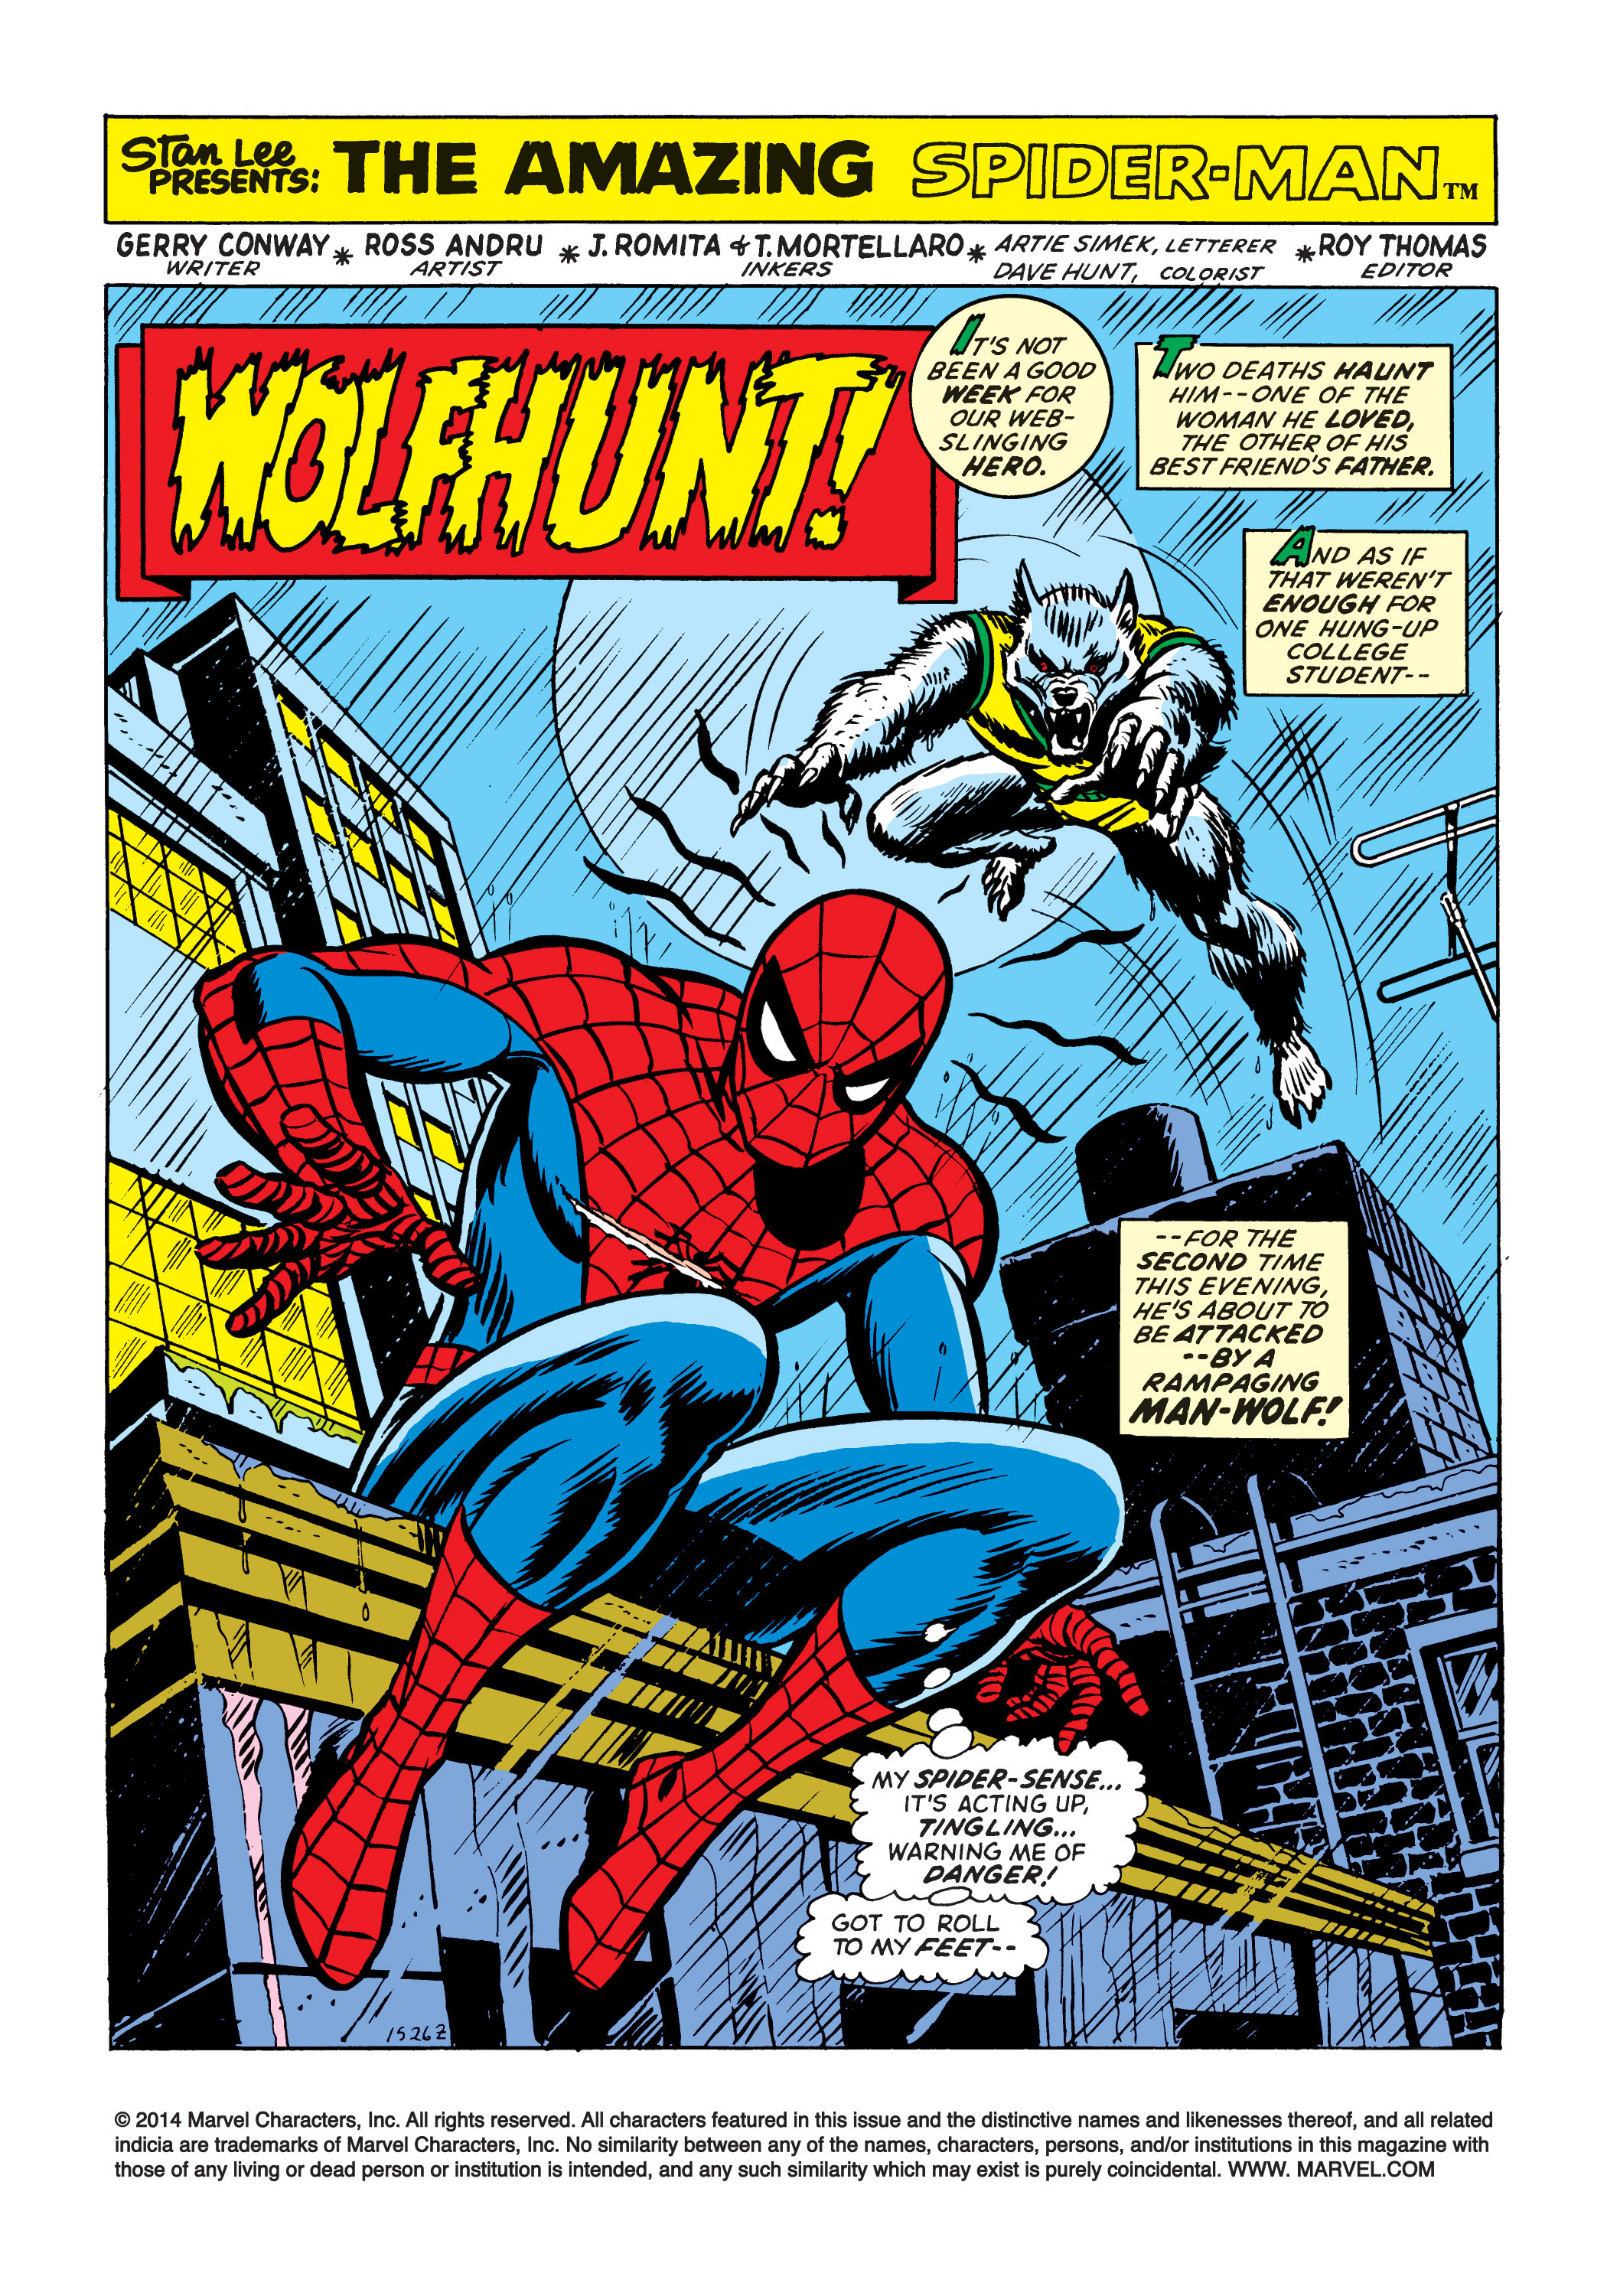 The Amazing Spider-Man (1963) 125 Page 1